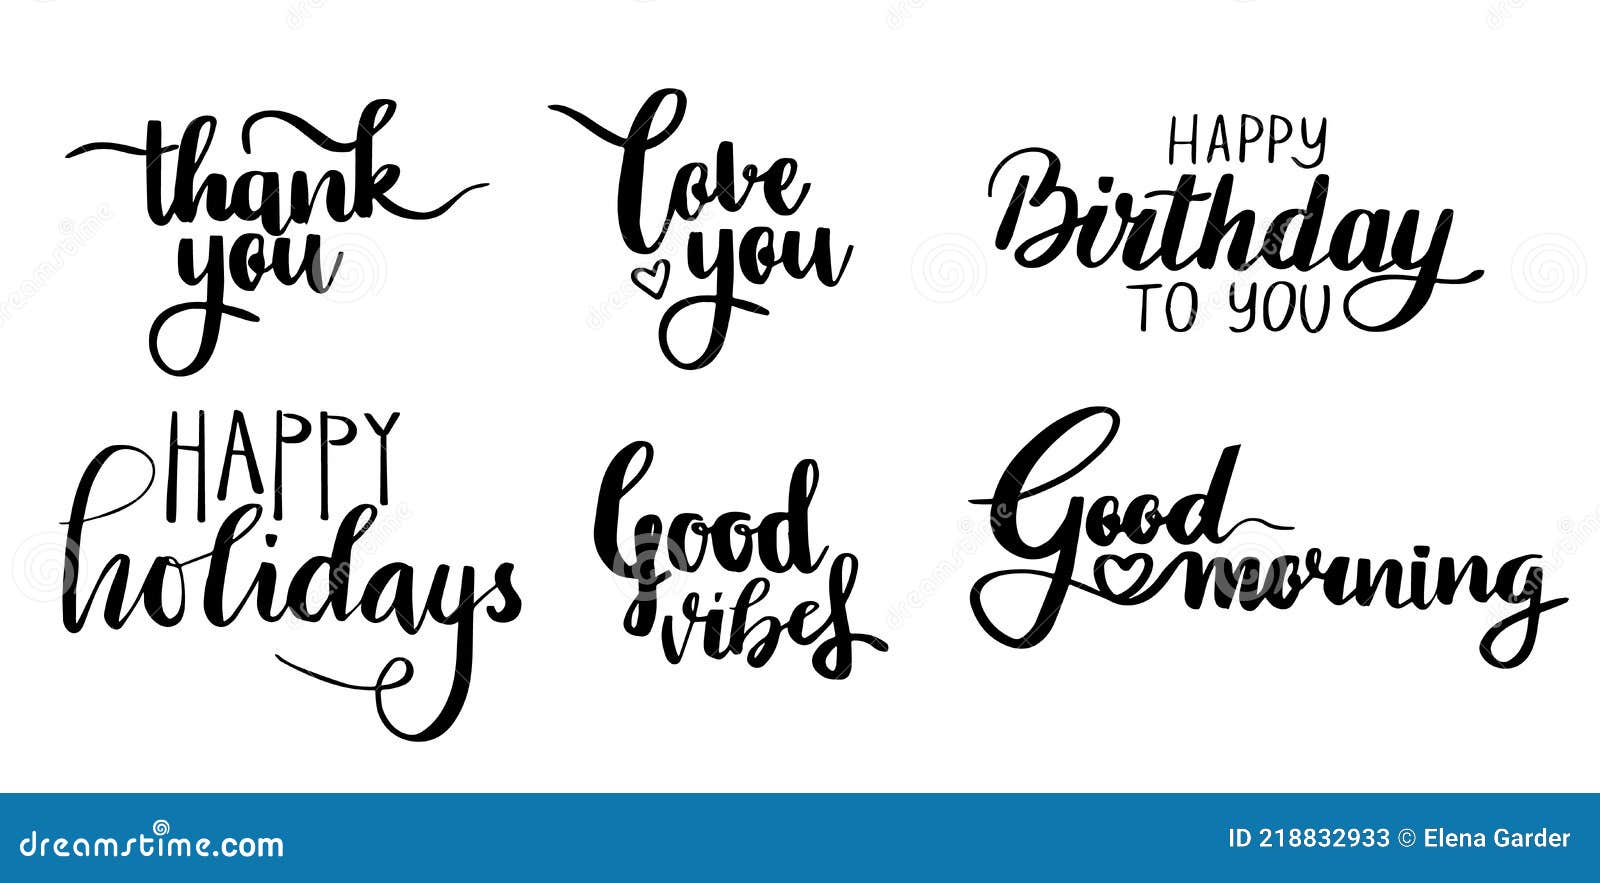 handwritting lettering. thank you, love you, good vibes, good morning, happy birthday, happy holidays